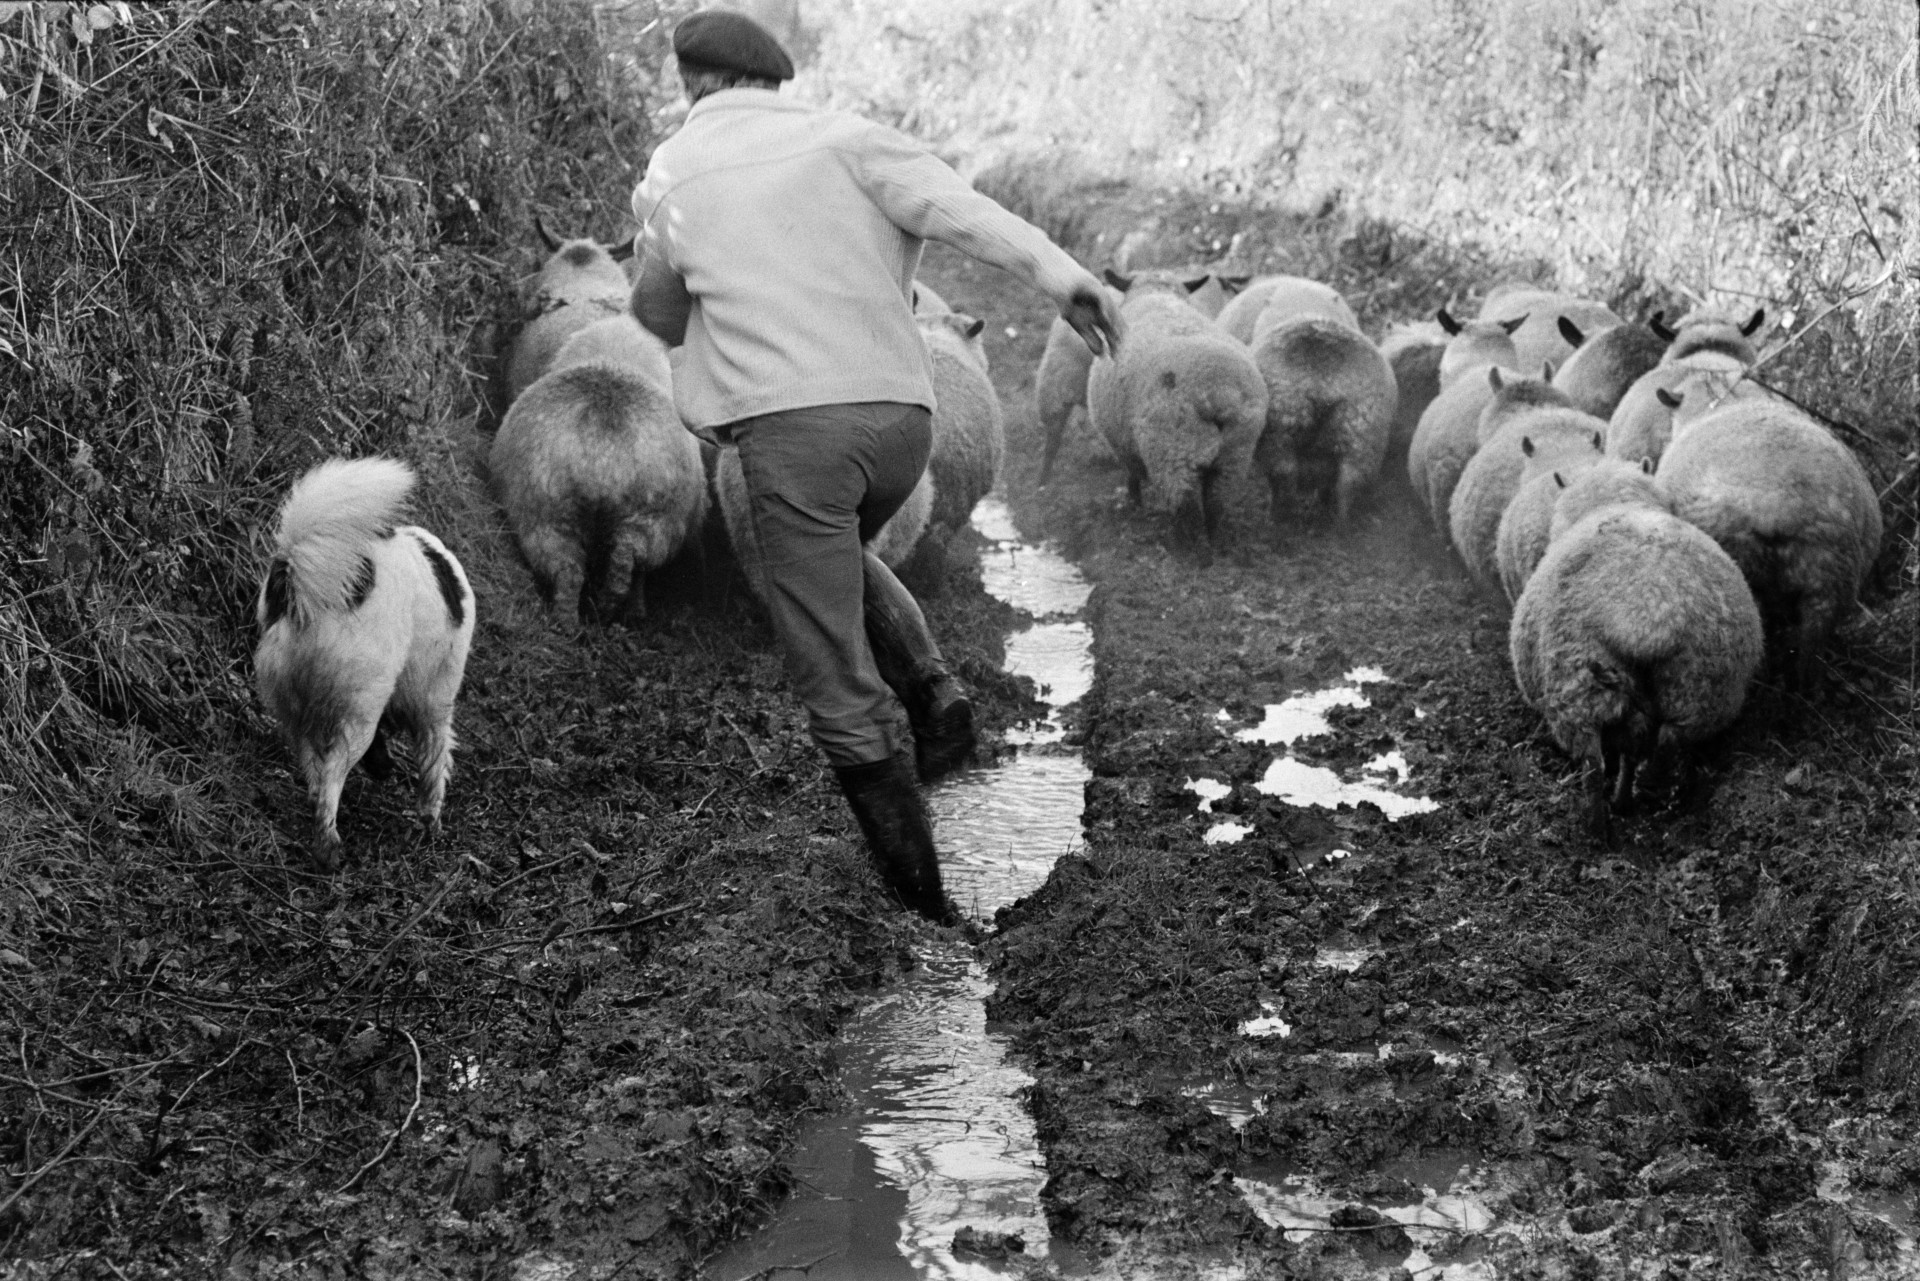 Ivor Bourne and a dog herding sheep along a muddy lane at Beaford.